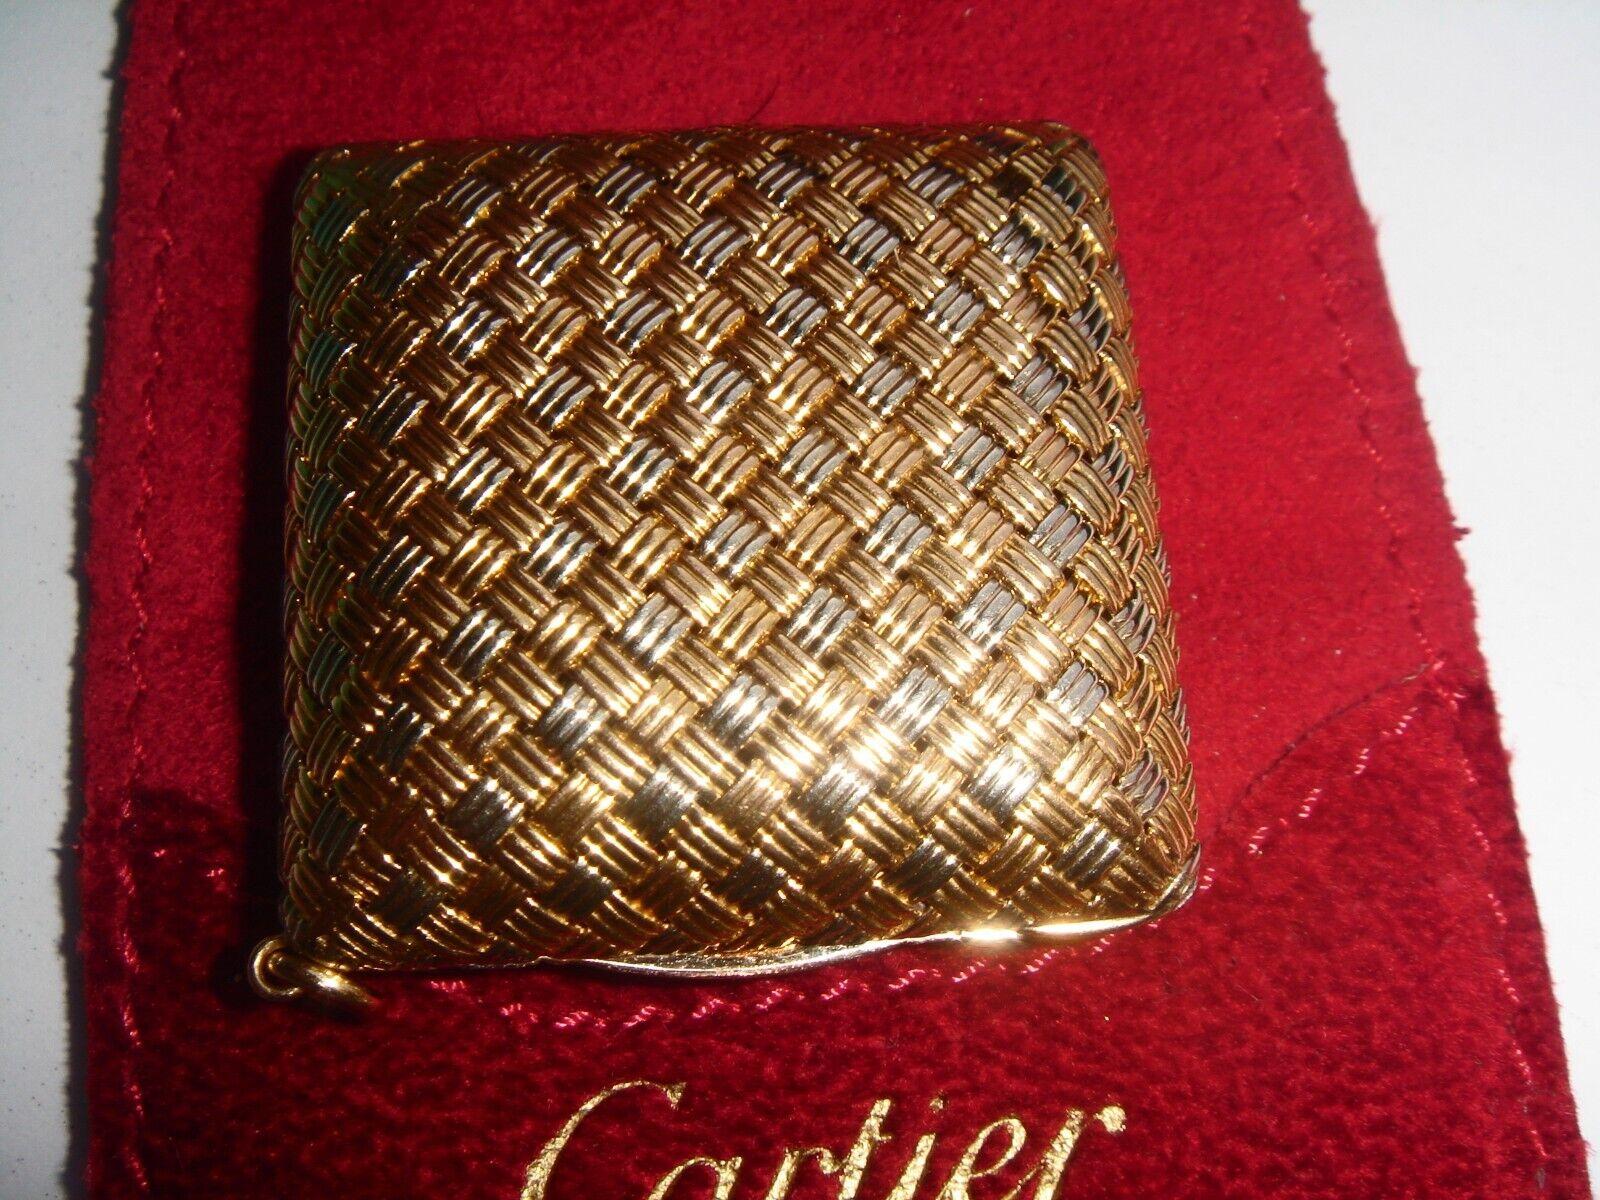 Cartier Paris 18k Two Tone Gold Pill Box Pendant Retro Circa 1950s


Here is your chance to purchase a beautiful and highly collectible designer pill box pendant.  Truly a great piece at a great price! 

Details:

This is a Vintage Heavy Cartier